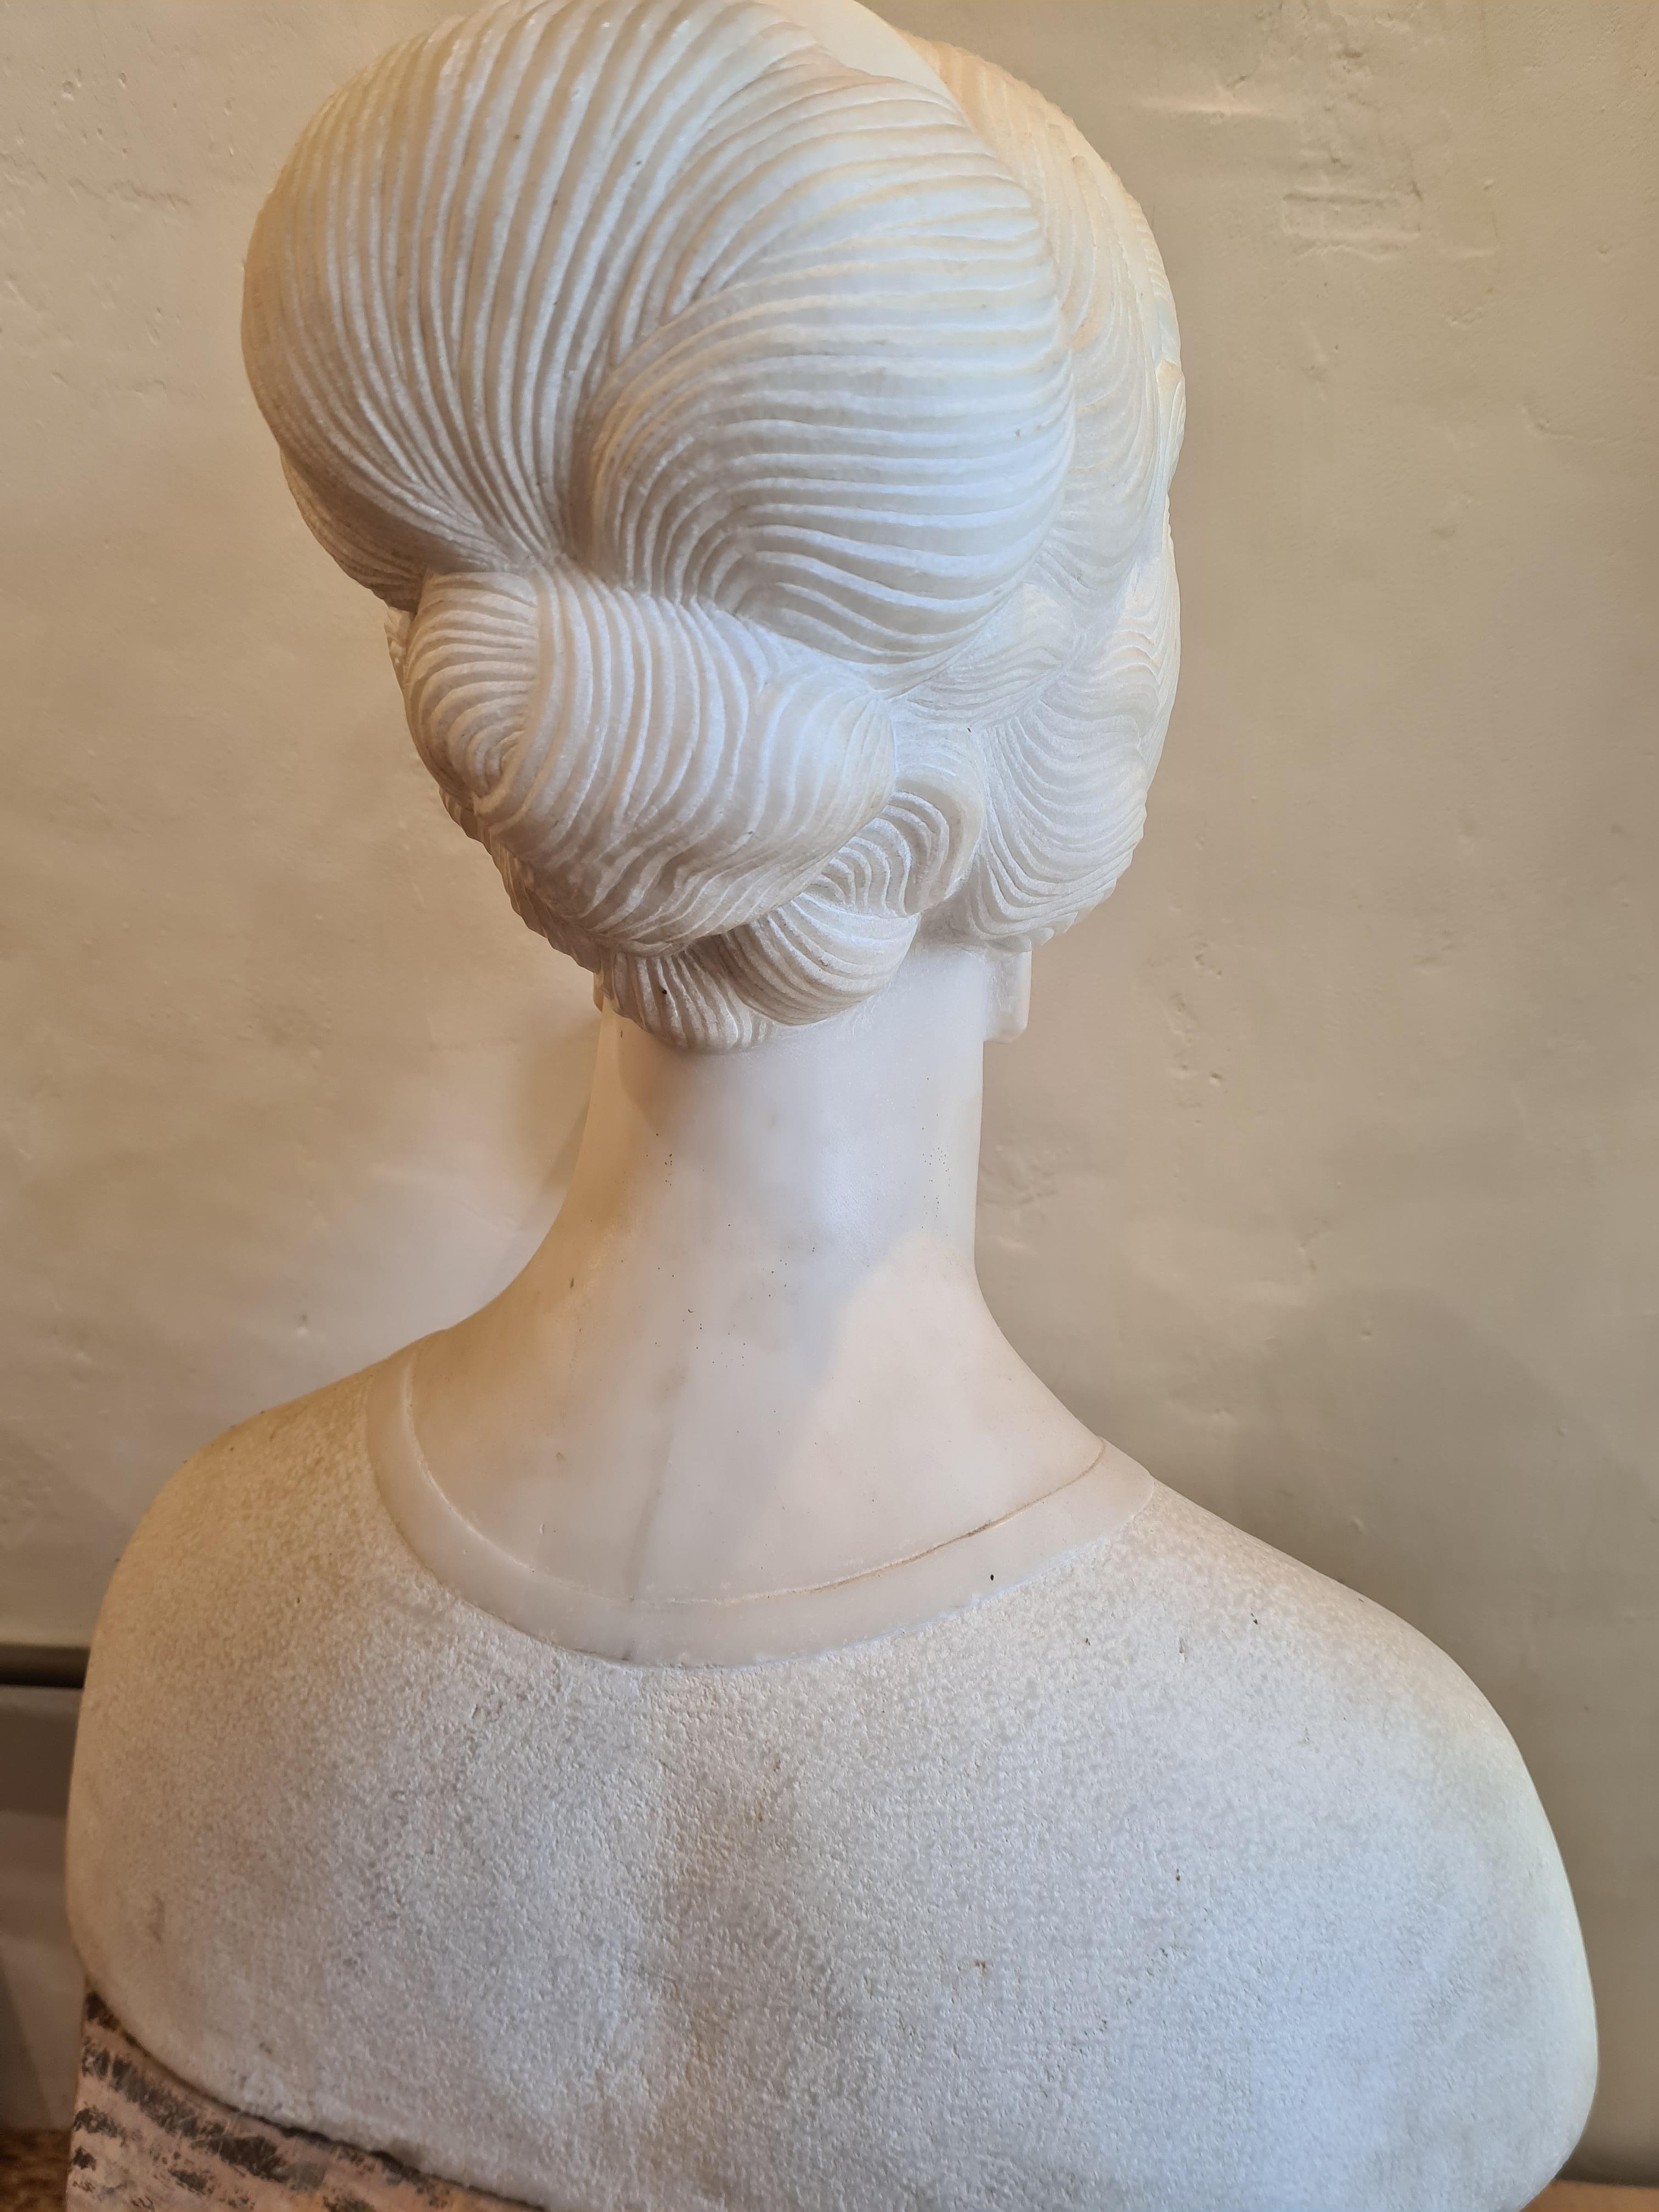 Art Déco period, large Carrara marble female bust sculpture by Raymond Delamarre, one of the pre eminent Art Deco sculptors of his day. Fashioned like a Renaissance Princess but with all the decorative details of the Art Deco period in the handling